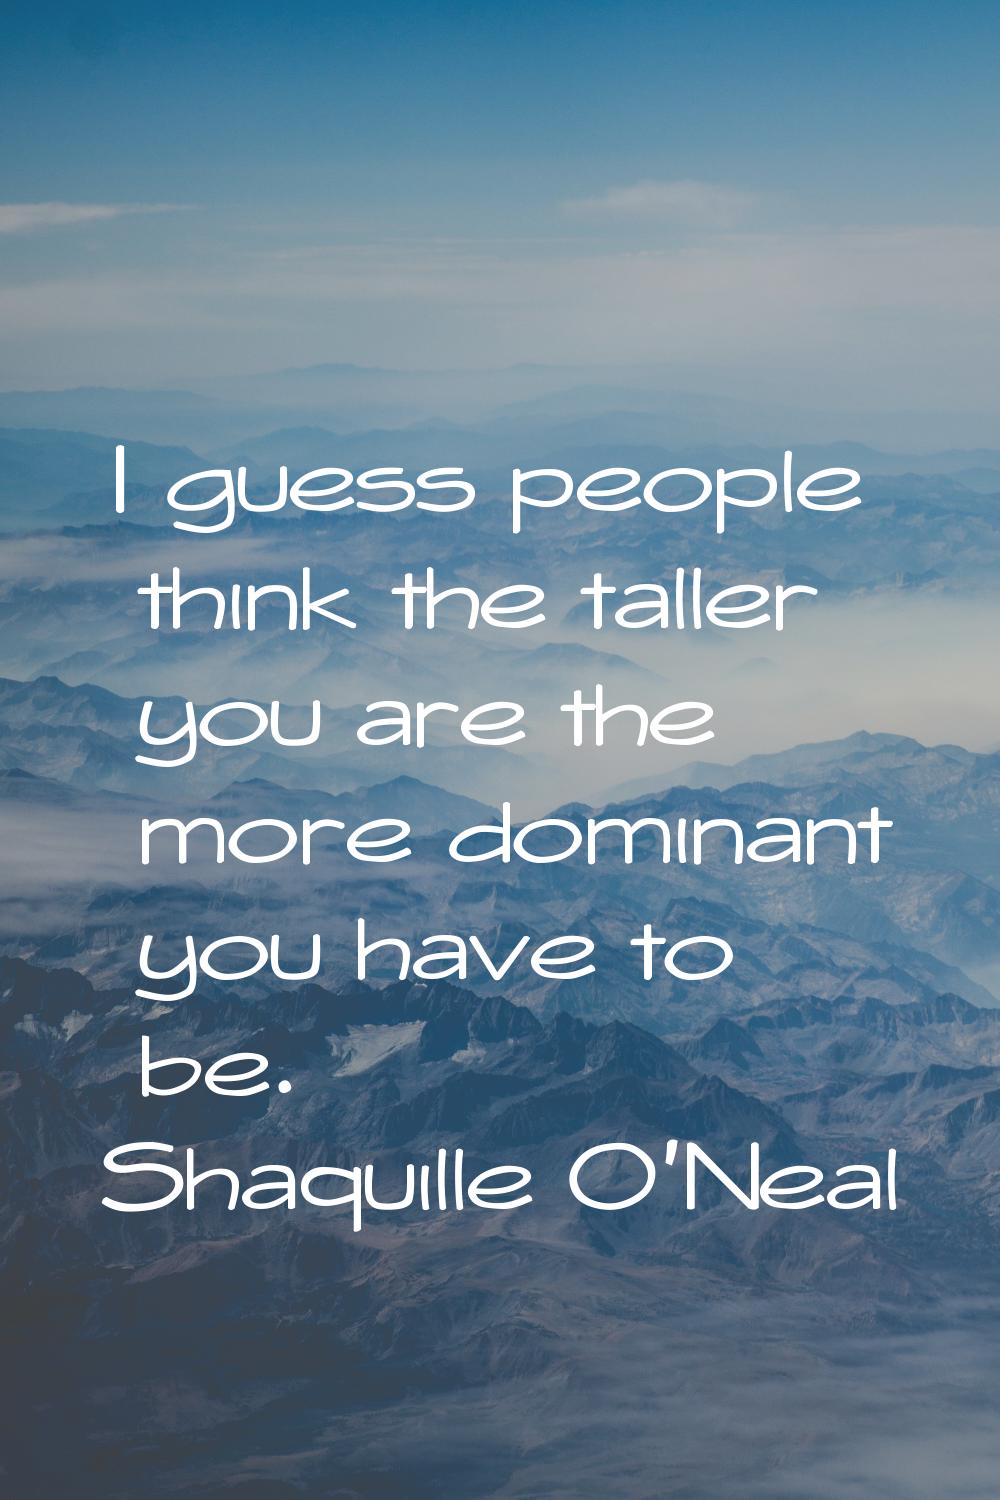 I guess people think the taller you are the more dominant you have to be.